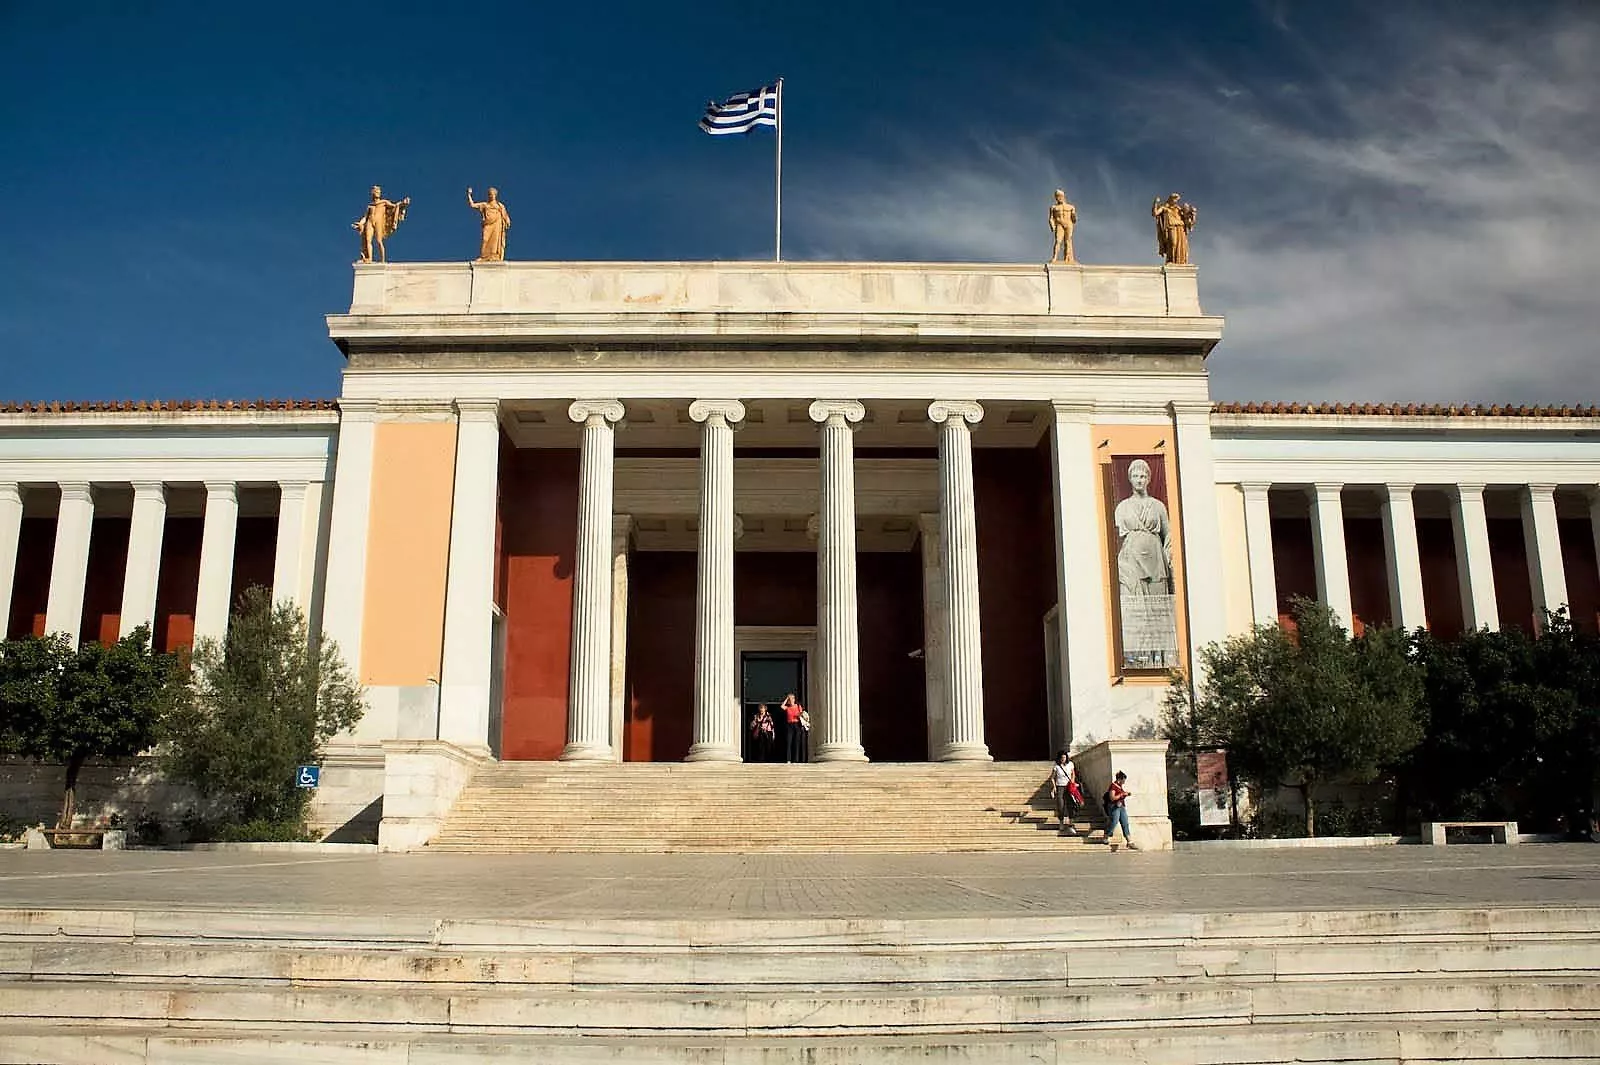 Thessaloniki Archaeological Museum in Greece, Europe | Museums - Rated 3.9